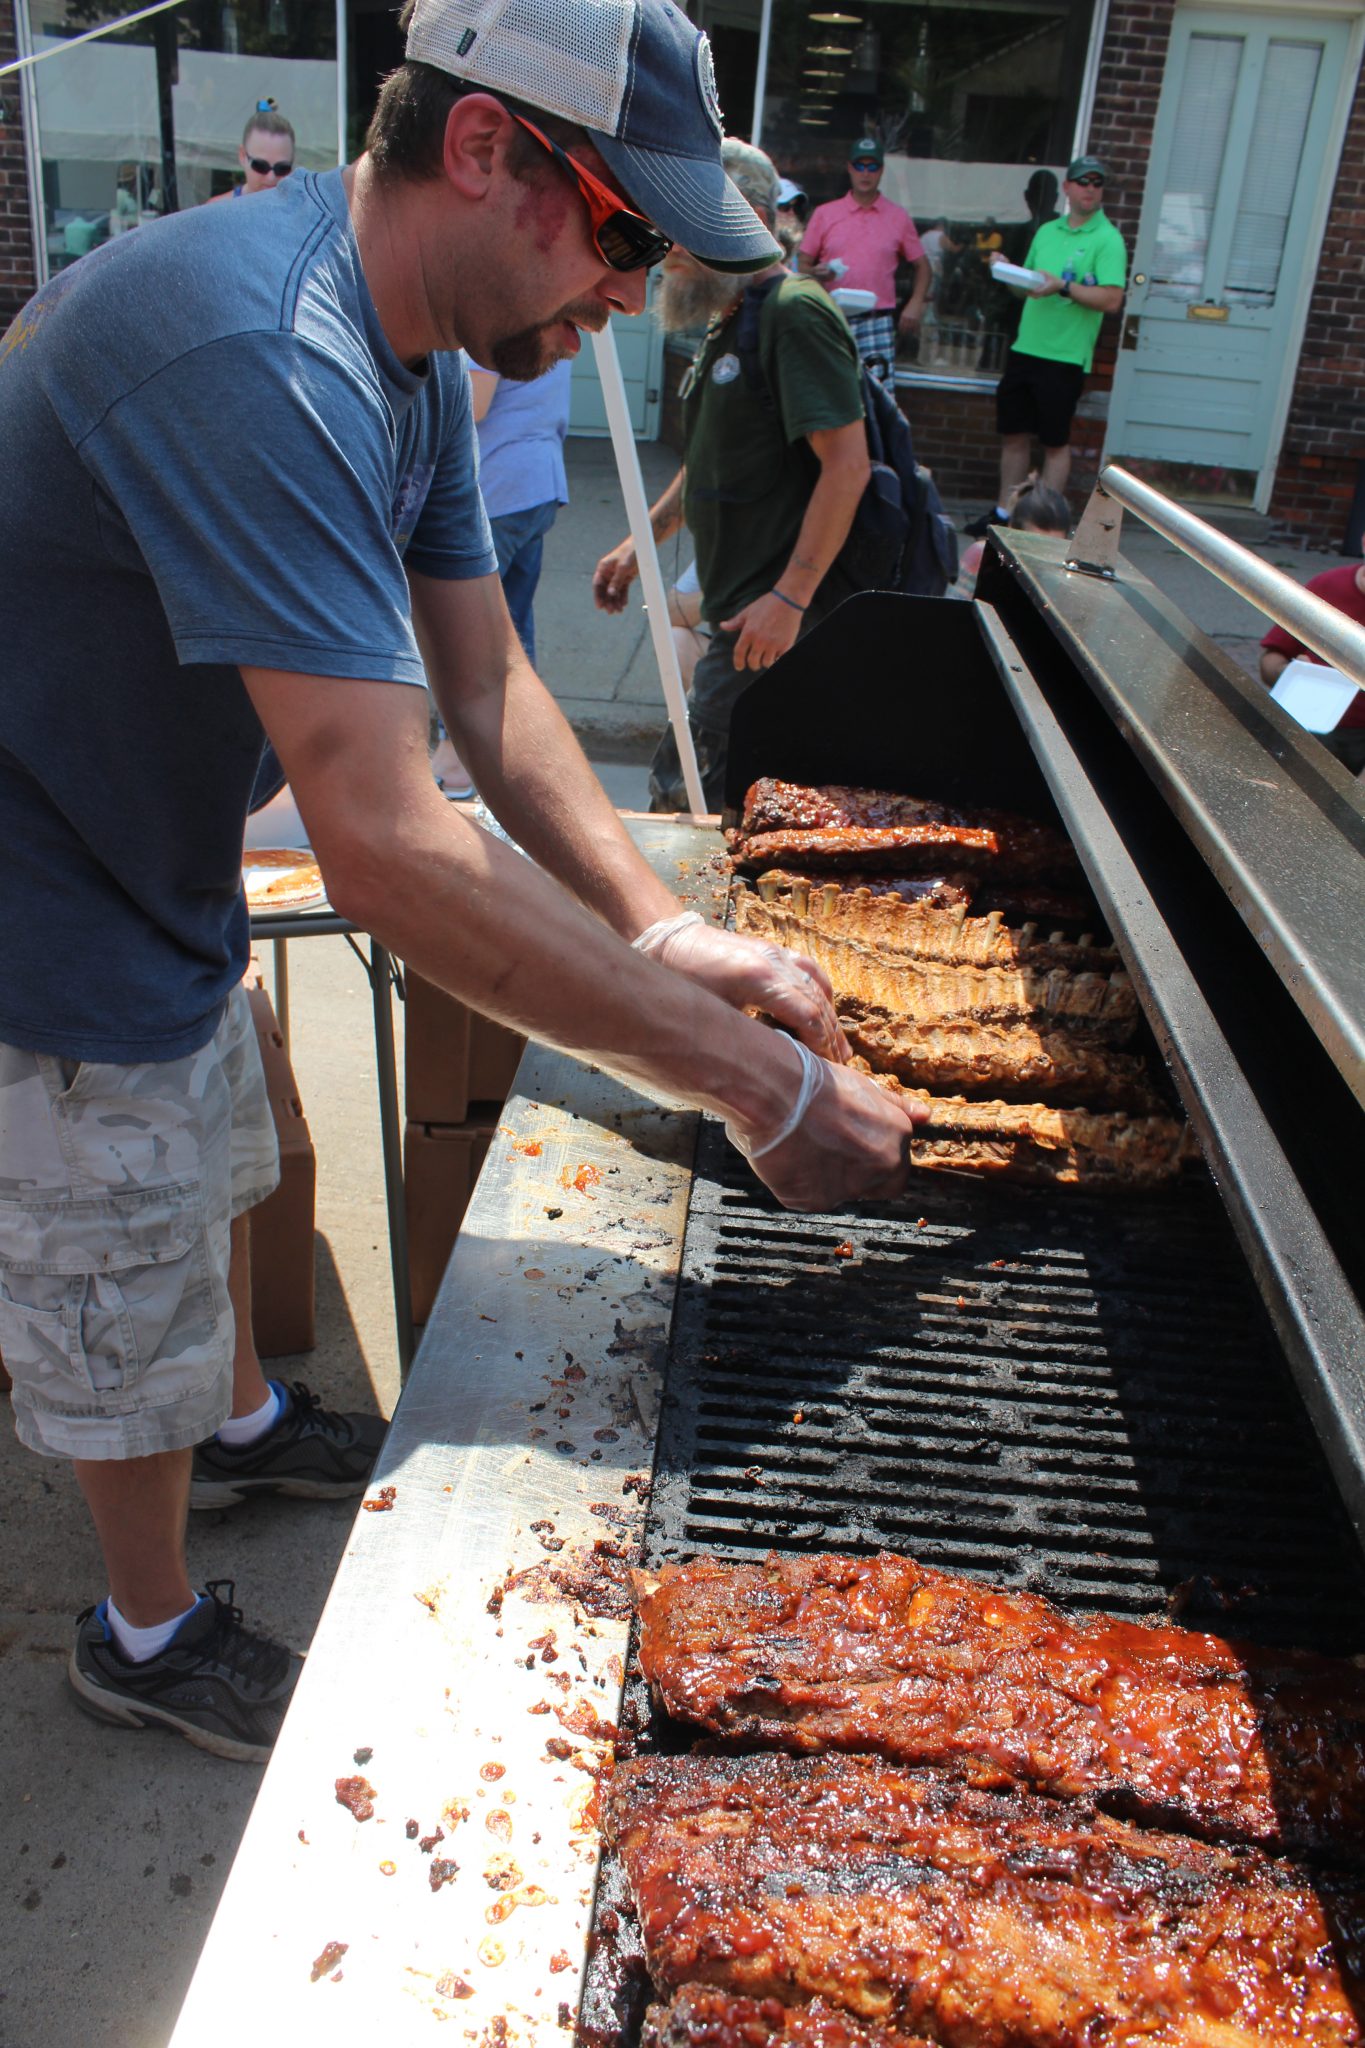 Downtown Tomahawk to host Thrilla on the Grilla rib contest this Saturday, Aug. 10